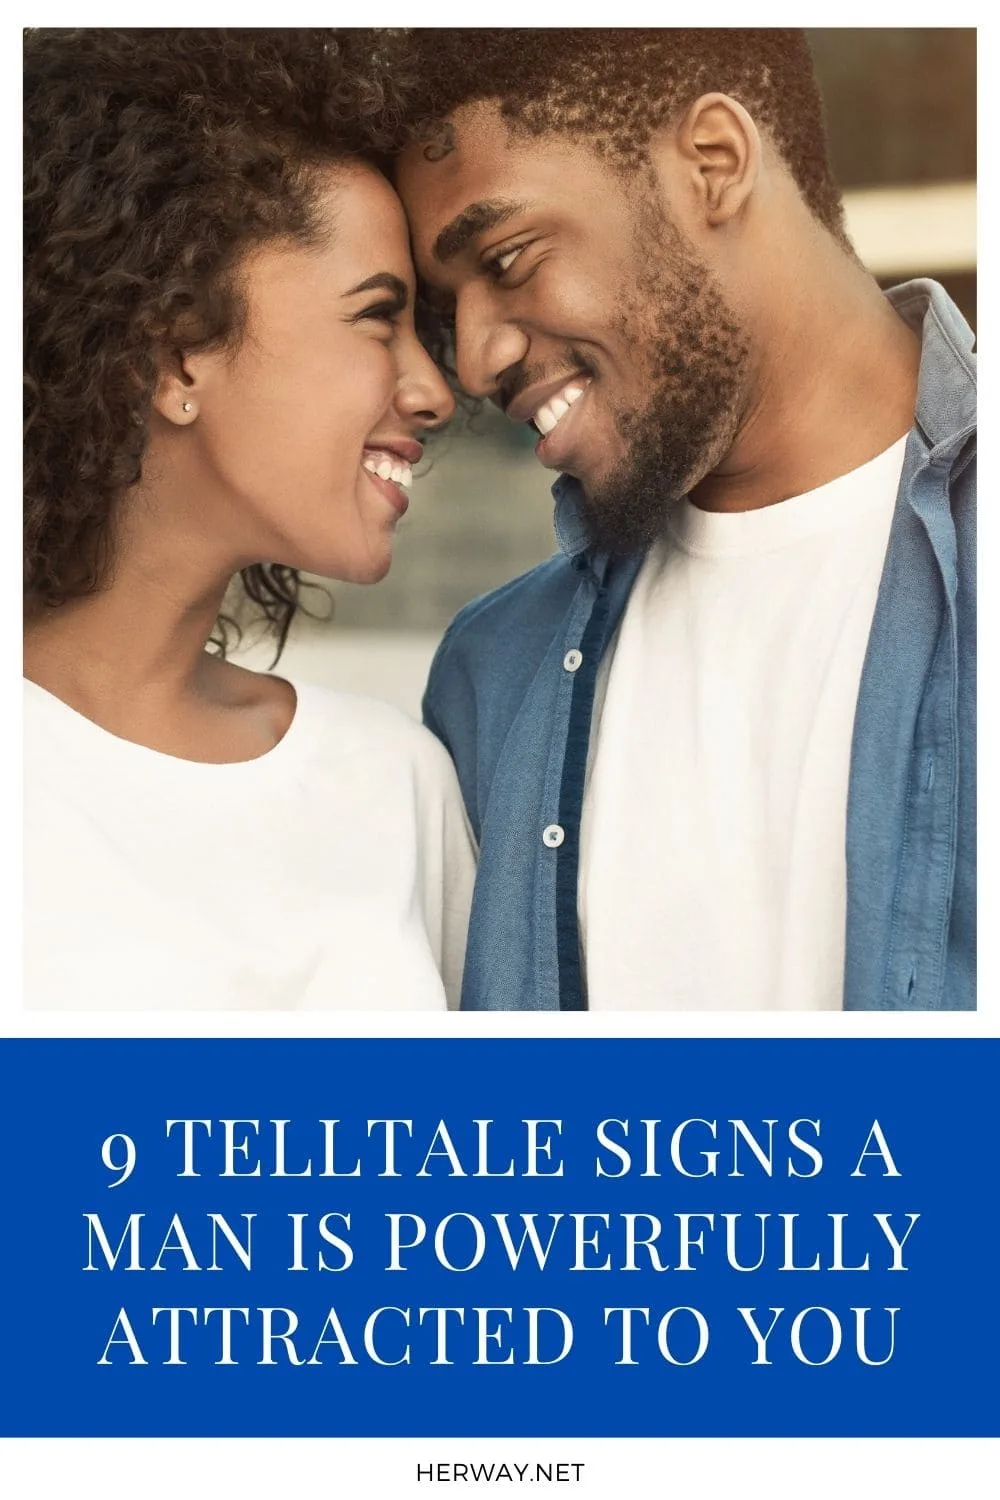 9 Telltale Signs A Man Is Powerfully Attracted To You